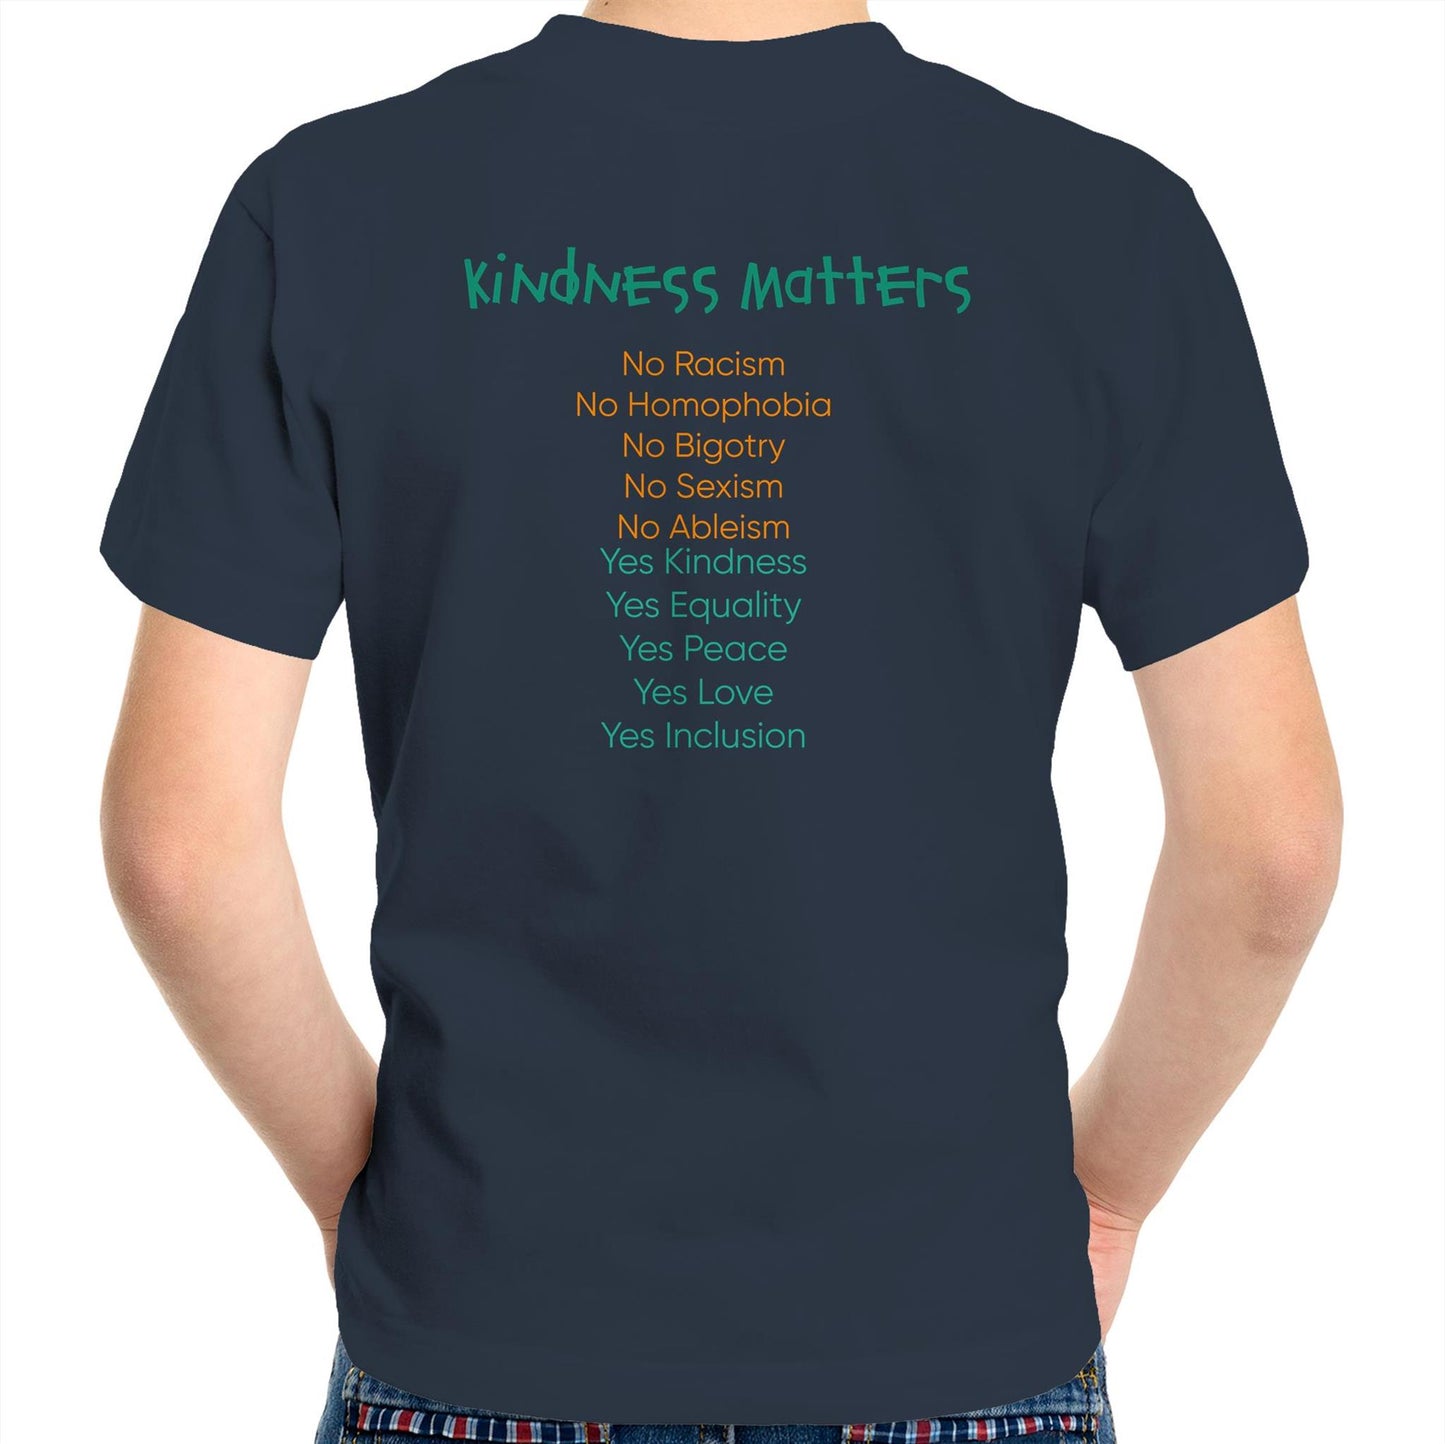 Kindness Matters, Kids Youth Crew T-Shirt by D.B. - Front and Back printing